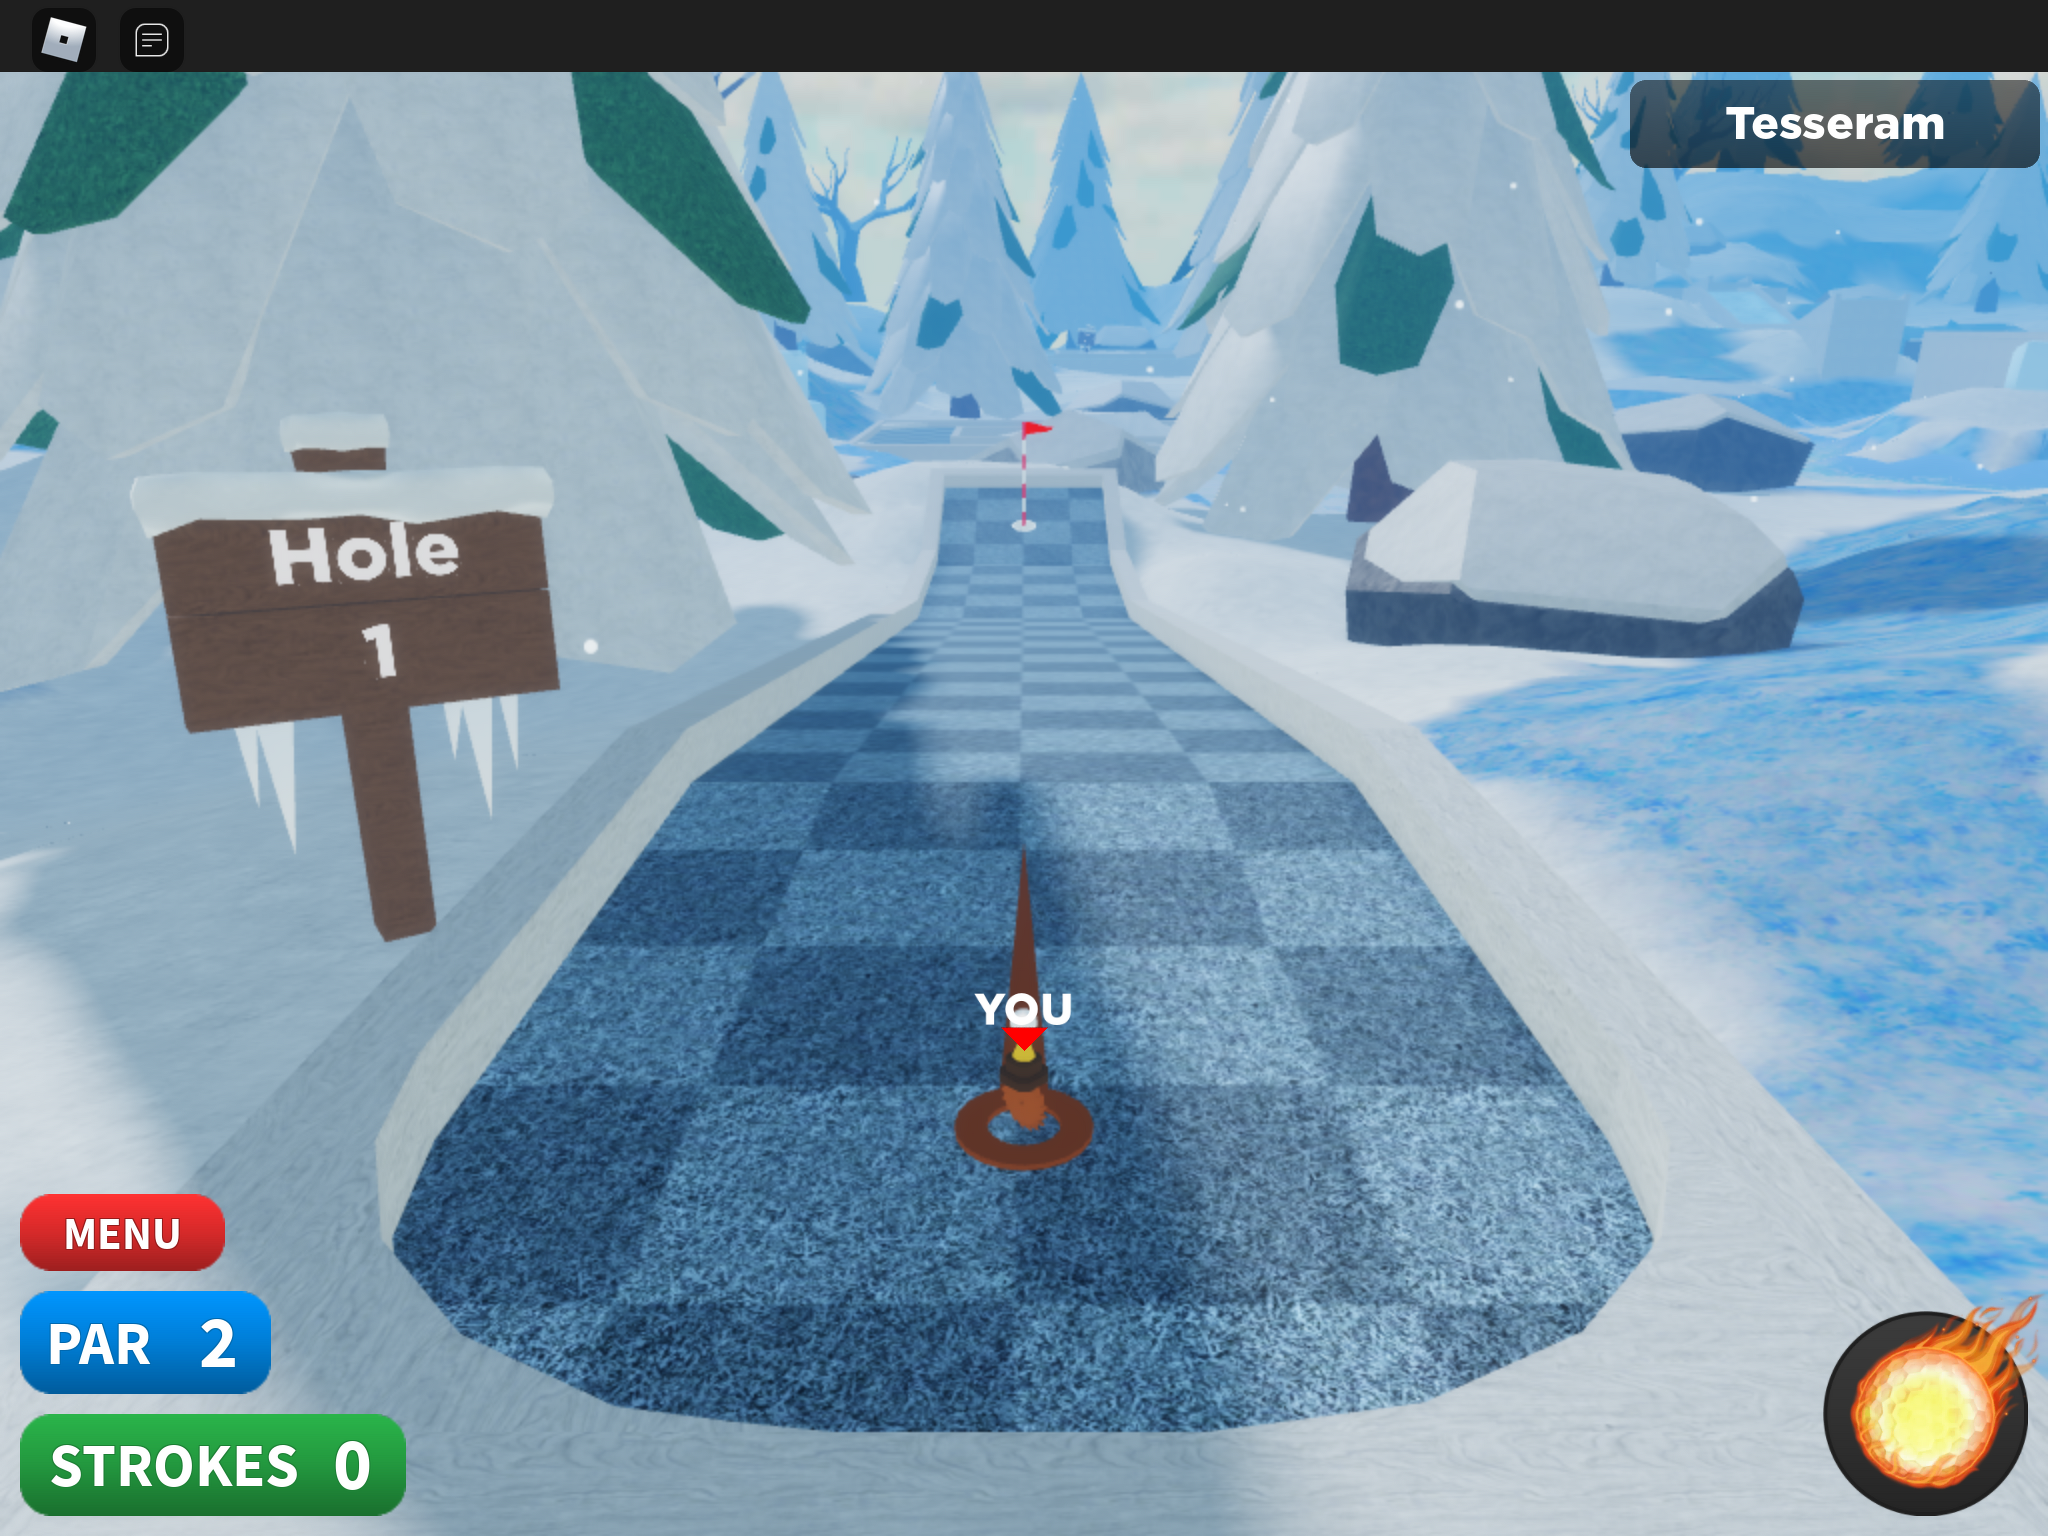 Super Golf Roblox - Arctic In 18 Strokes! (Normal Settings) 